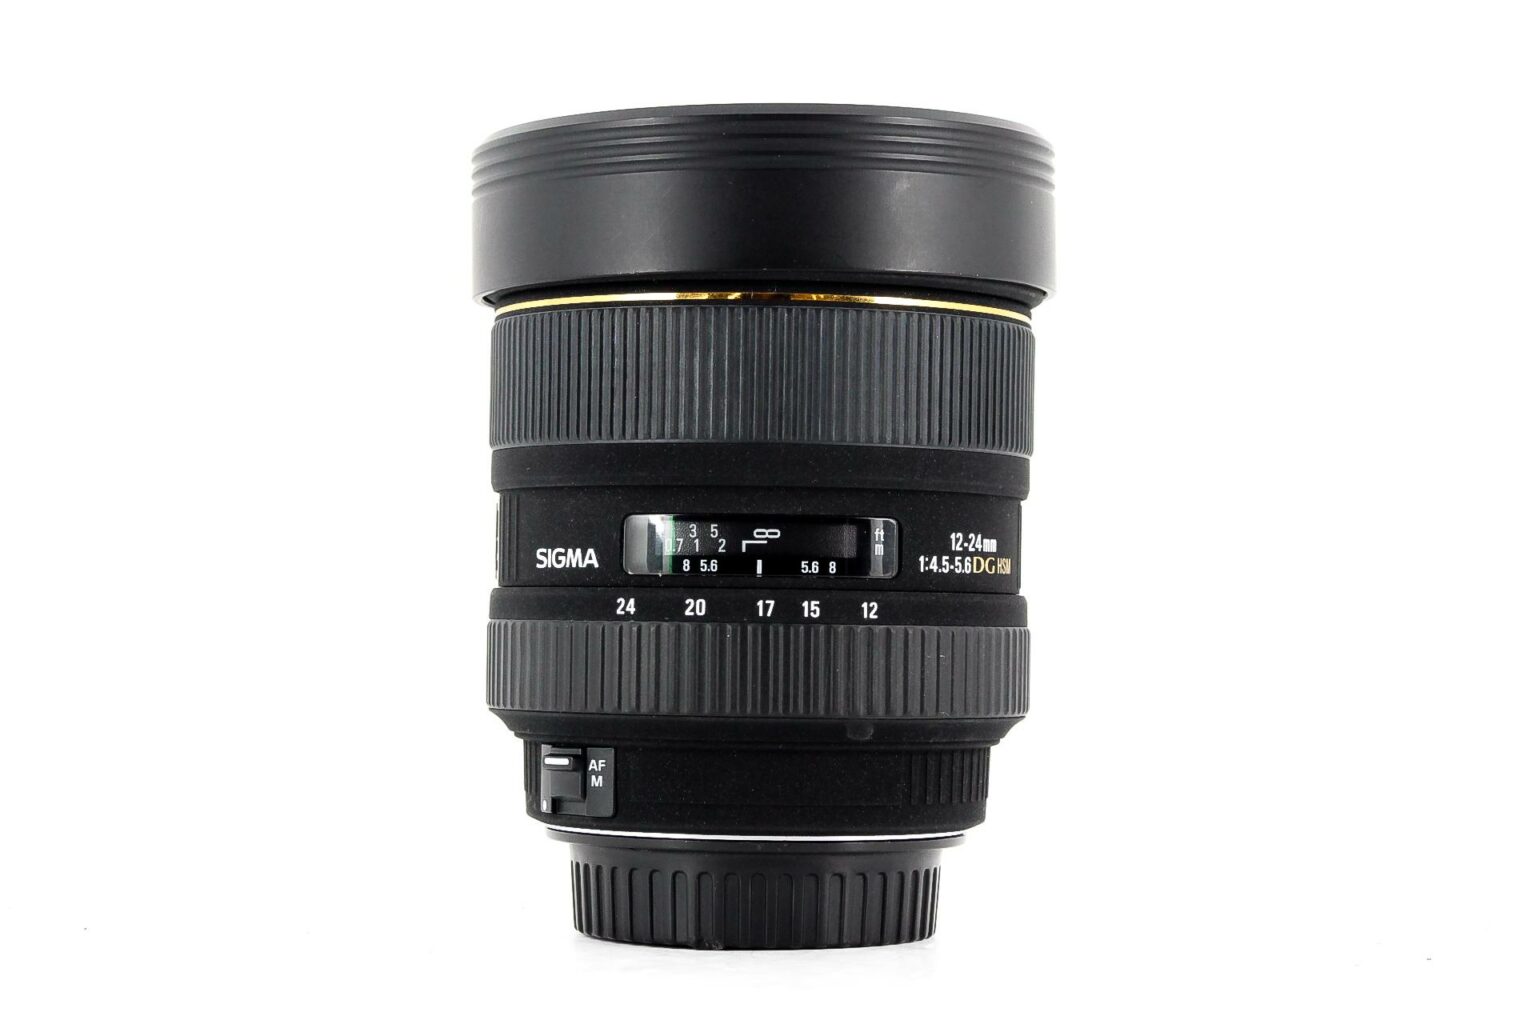 Sigma 12-24mm f/4.5-5.6 EX DG, Canon EF Fit Lens - Lenses and Cameras